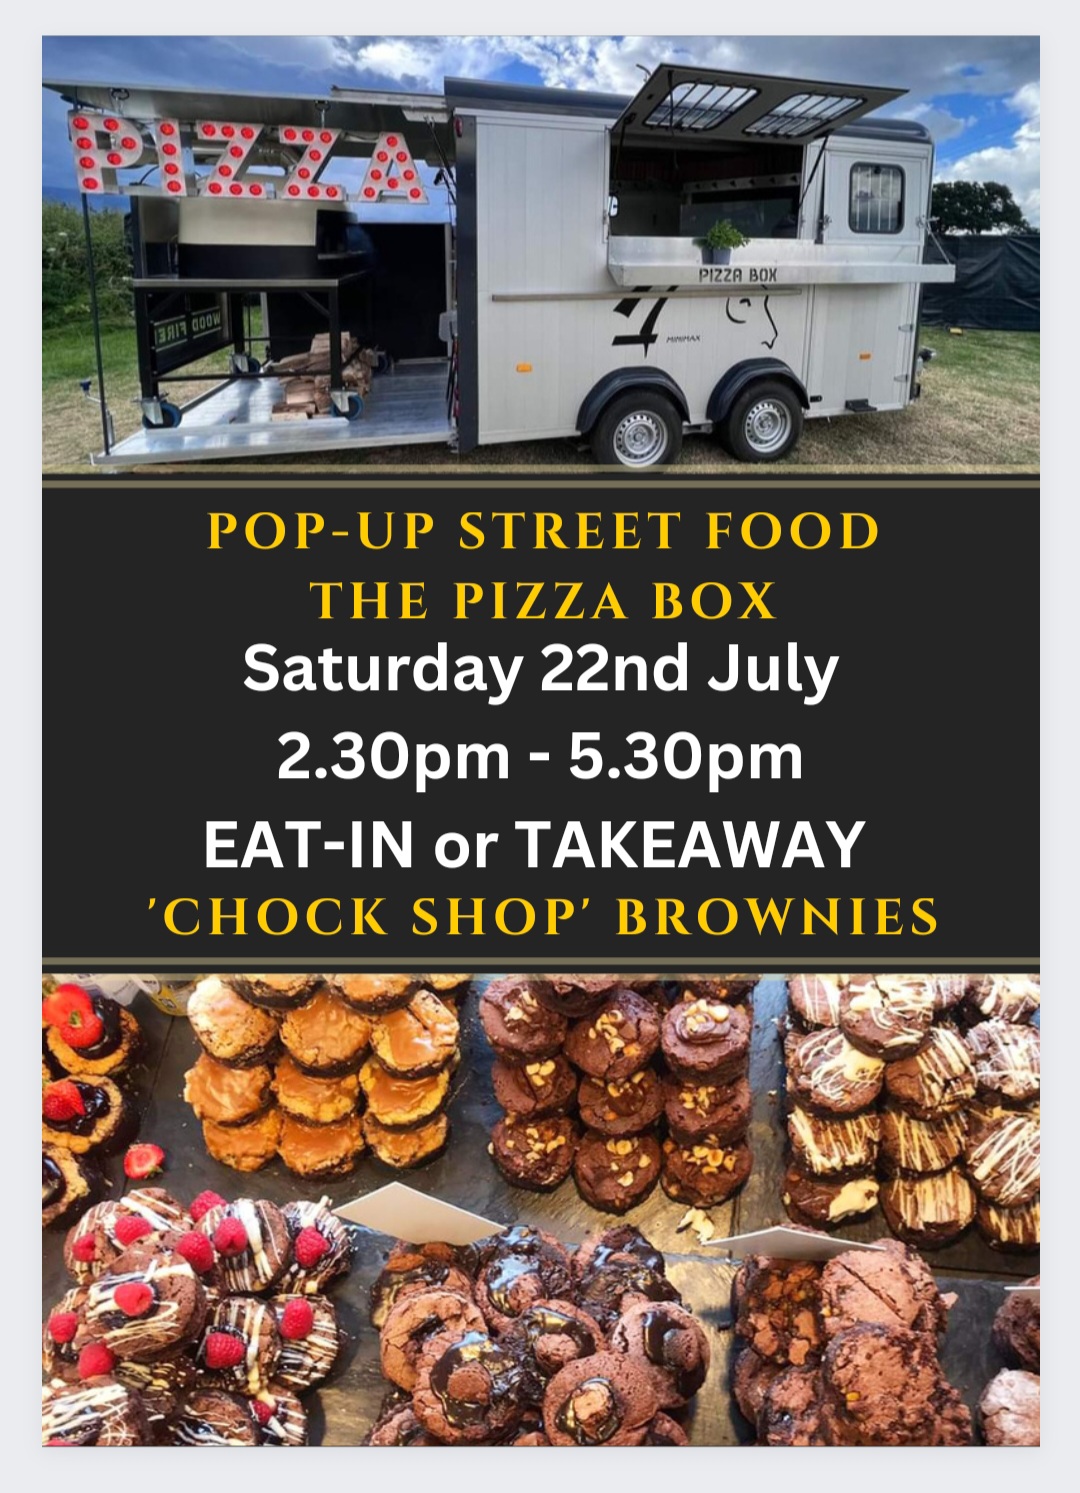 Join us for pop-up STREET FOOD PIZZA with THE PIZZA BOX and CHOCOLATE BROWNIES with The Chock Shop. Both in our car park EAT-IN or TAKEAWAY on Saturday 22nd July from 2.30pm until 5.30pm